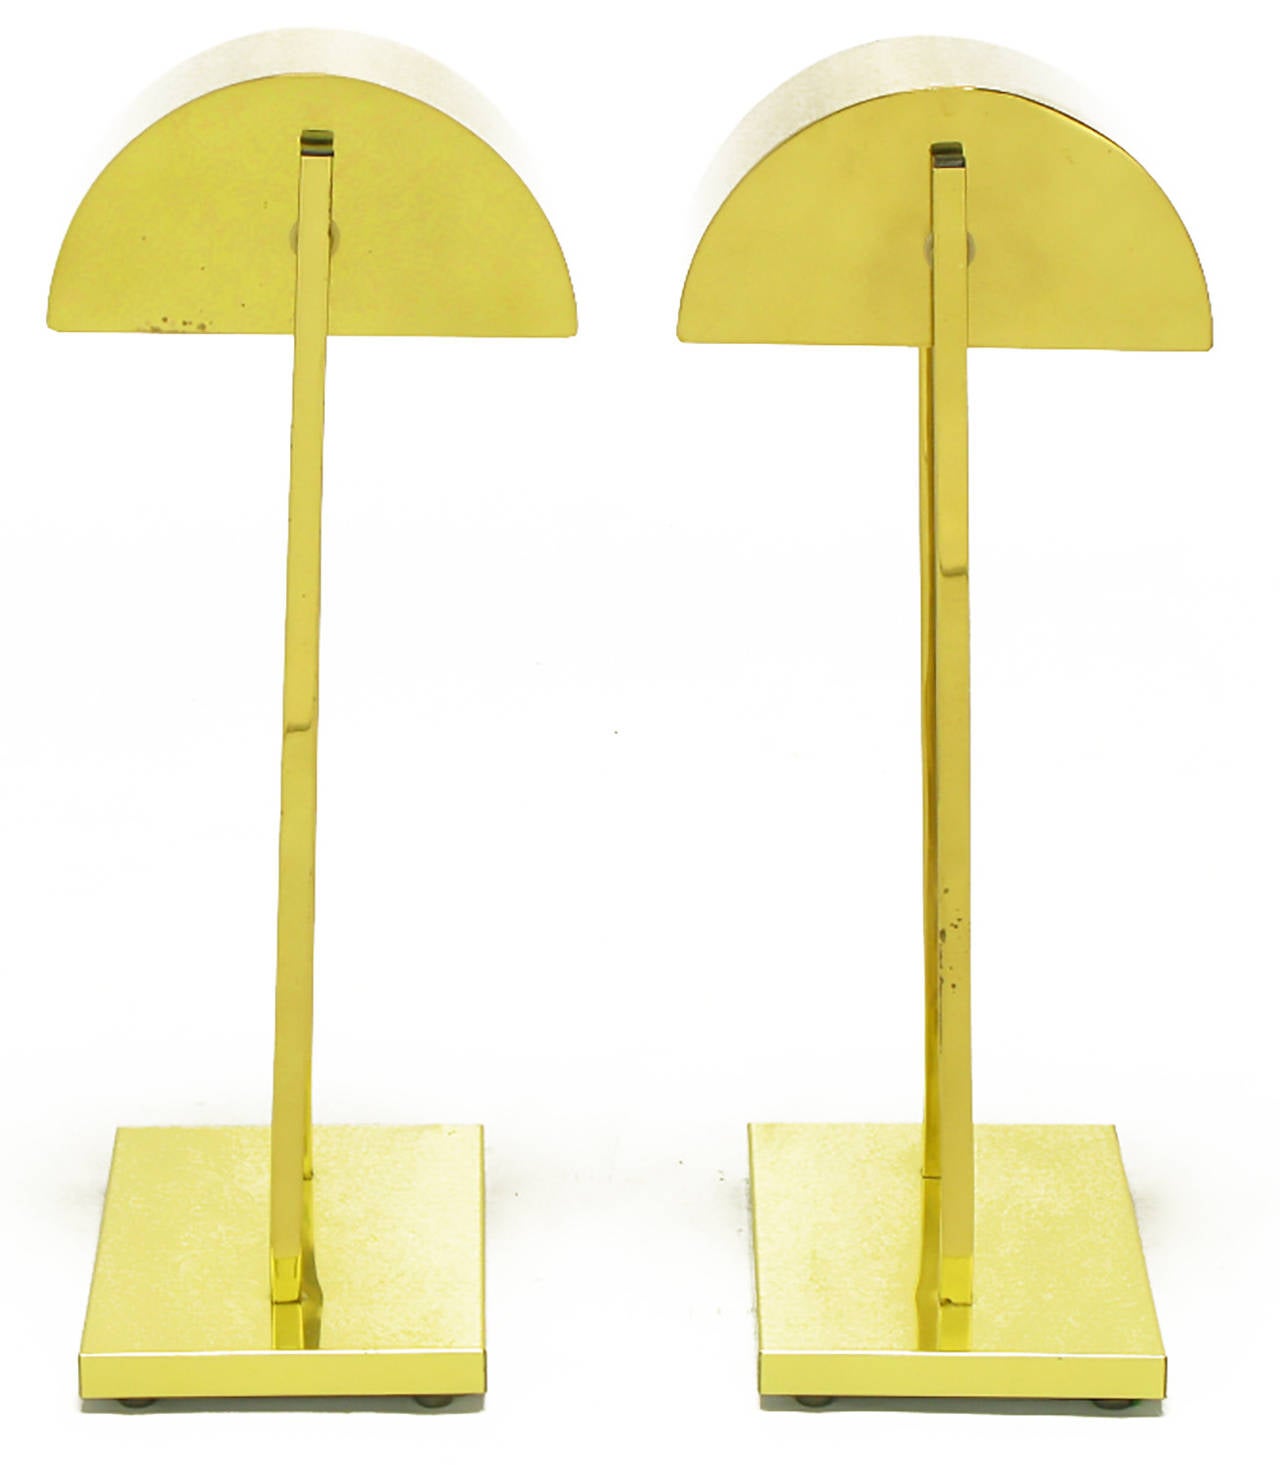 Unusual pair of Kovacs lighting brass desk top table lamps with brass demilune shades after Walter Von Nessen. Shades are supported by two brass square bar uprights and have a brass rod stop on the side that enables them to swivel 45 degrees. Heavy